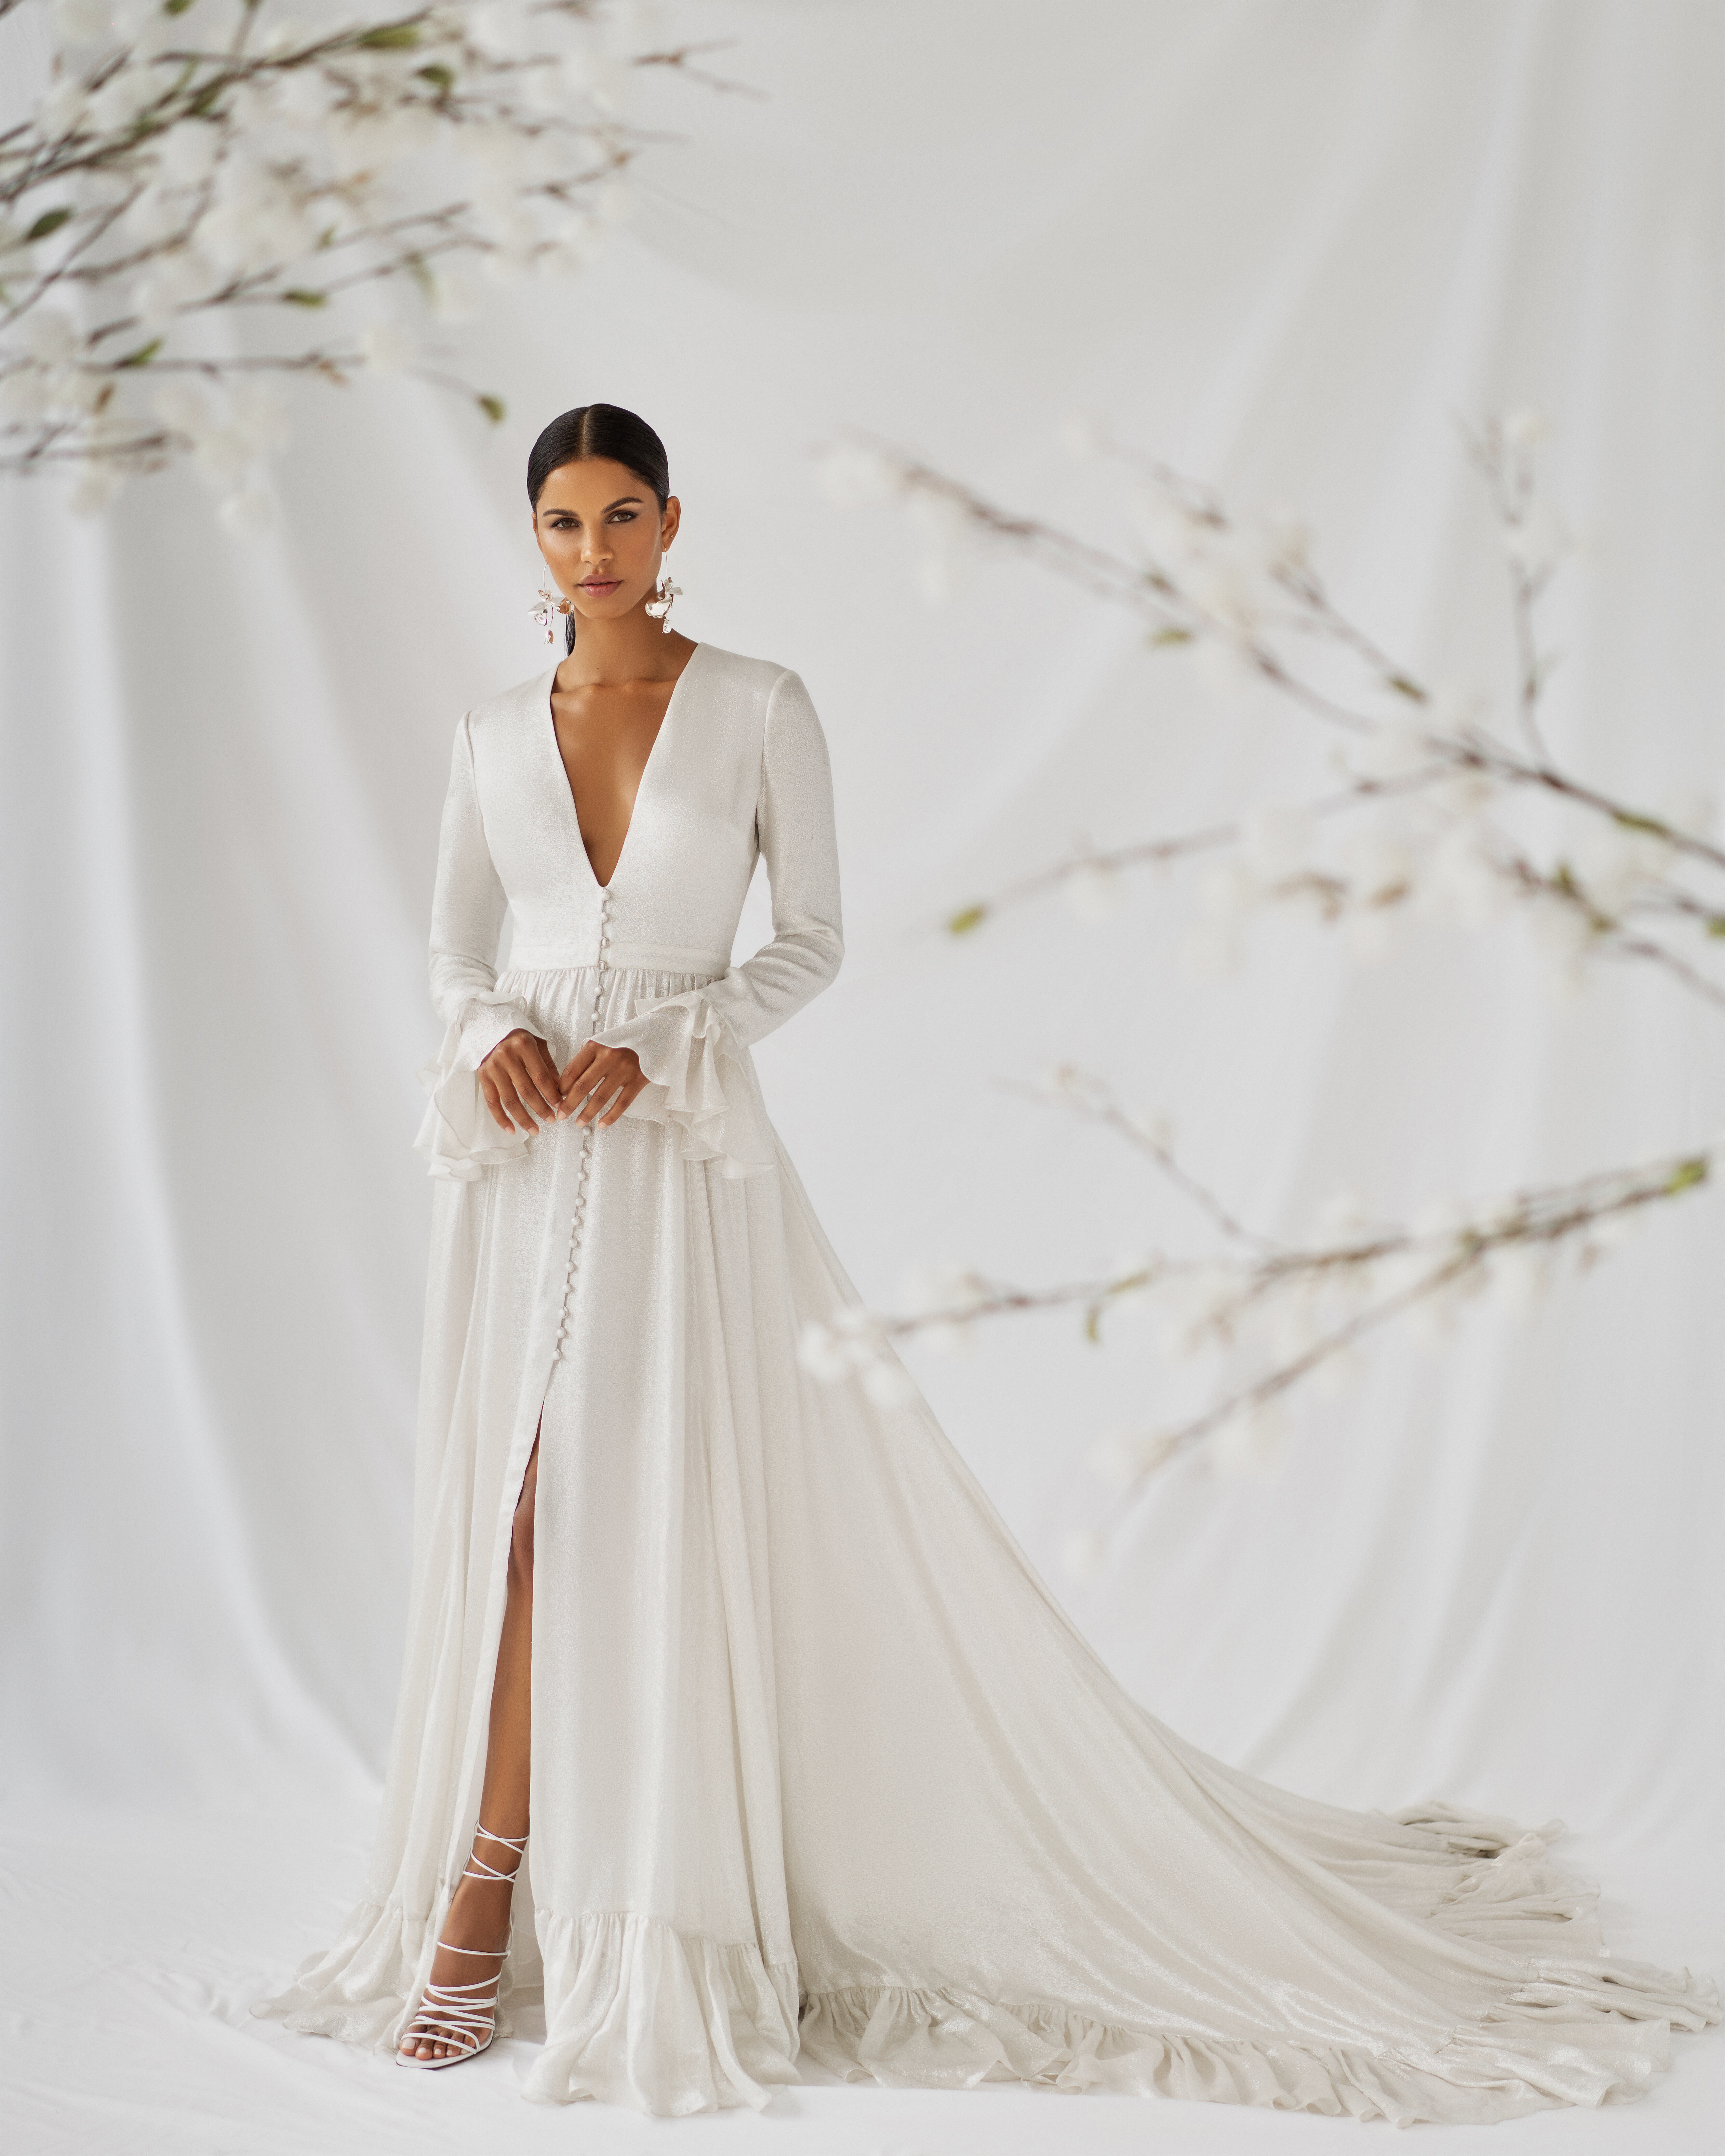 25 Of The Best Backyard Wedding Dresses For Any Type Of Bride | HuffPost  Life